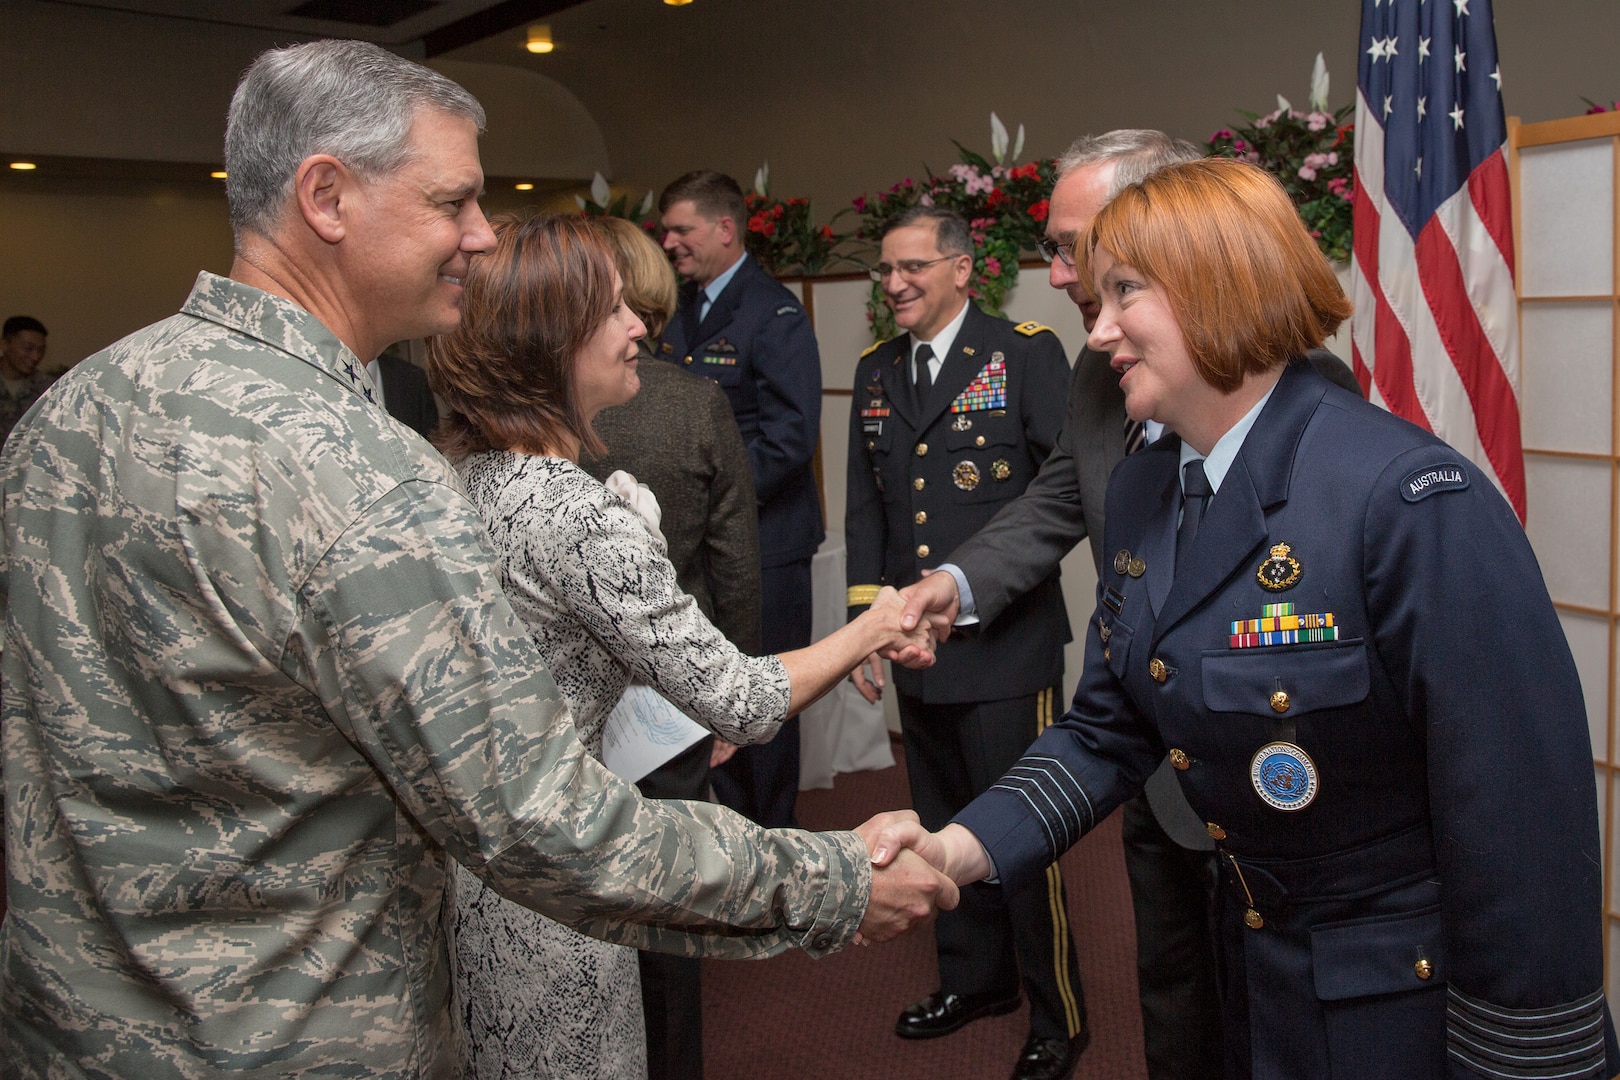 (Left to right) U.S. Air Force Lt. Gen. Sam Angelella, the commander of U.S. Forces Japan and the 5th Air Force, greets Royal Australia Air Force Group Captain Barbara Courtney, United Nations Command (Rear) commander, after the UNC (Rear) change of command ceremony at Yokota Air Base, Japan, Jan. 28, 2014. As the United Nations Command’s principal representative in Japan, the UNC (Rear) maintains the status of forces agreement regarding United Nations Forces in Japan during armistice conditions. (U.S. Air Force photo by Osakabe Yasuo/Released)